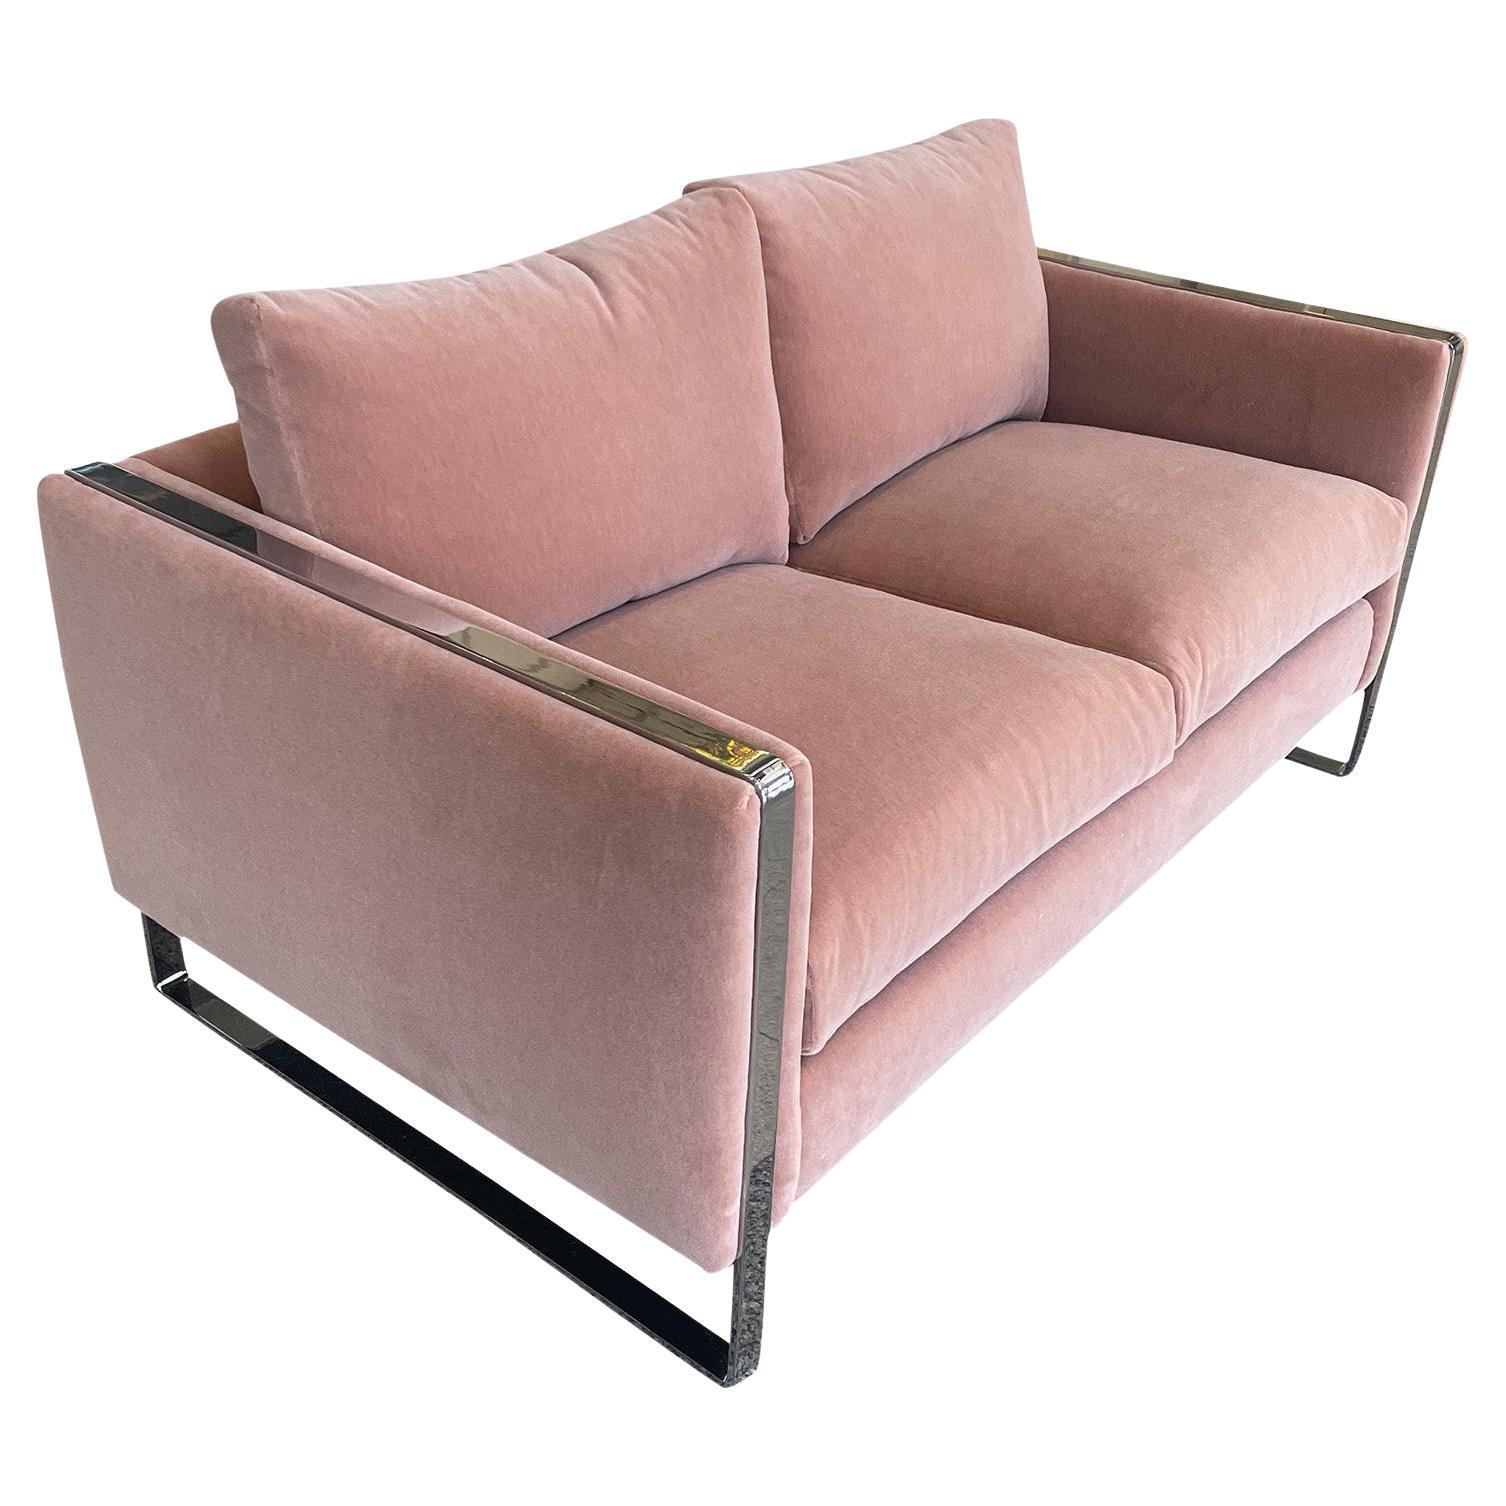 Midcentury Chrome Loveseat After Milo Baughman in Dusty Mauve Mohair